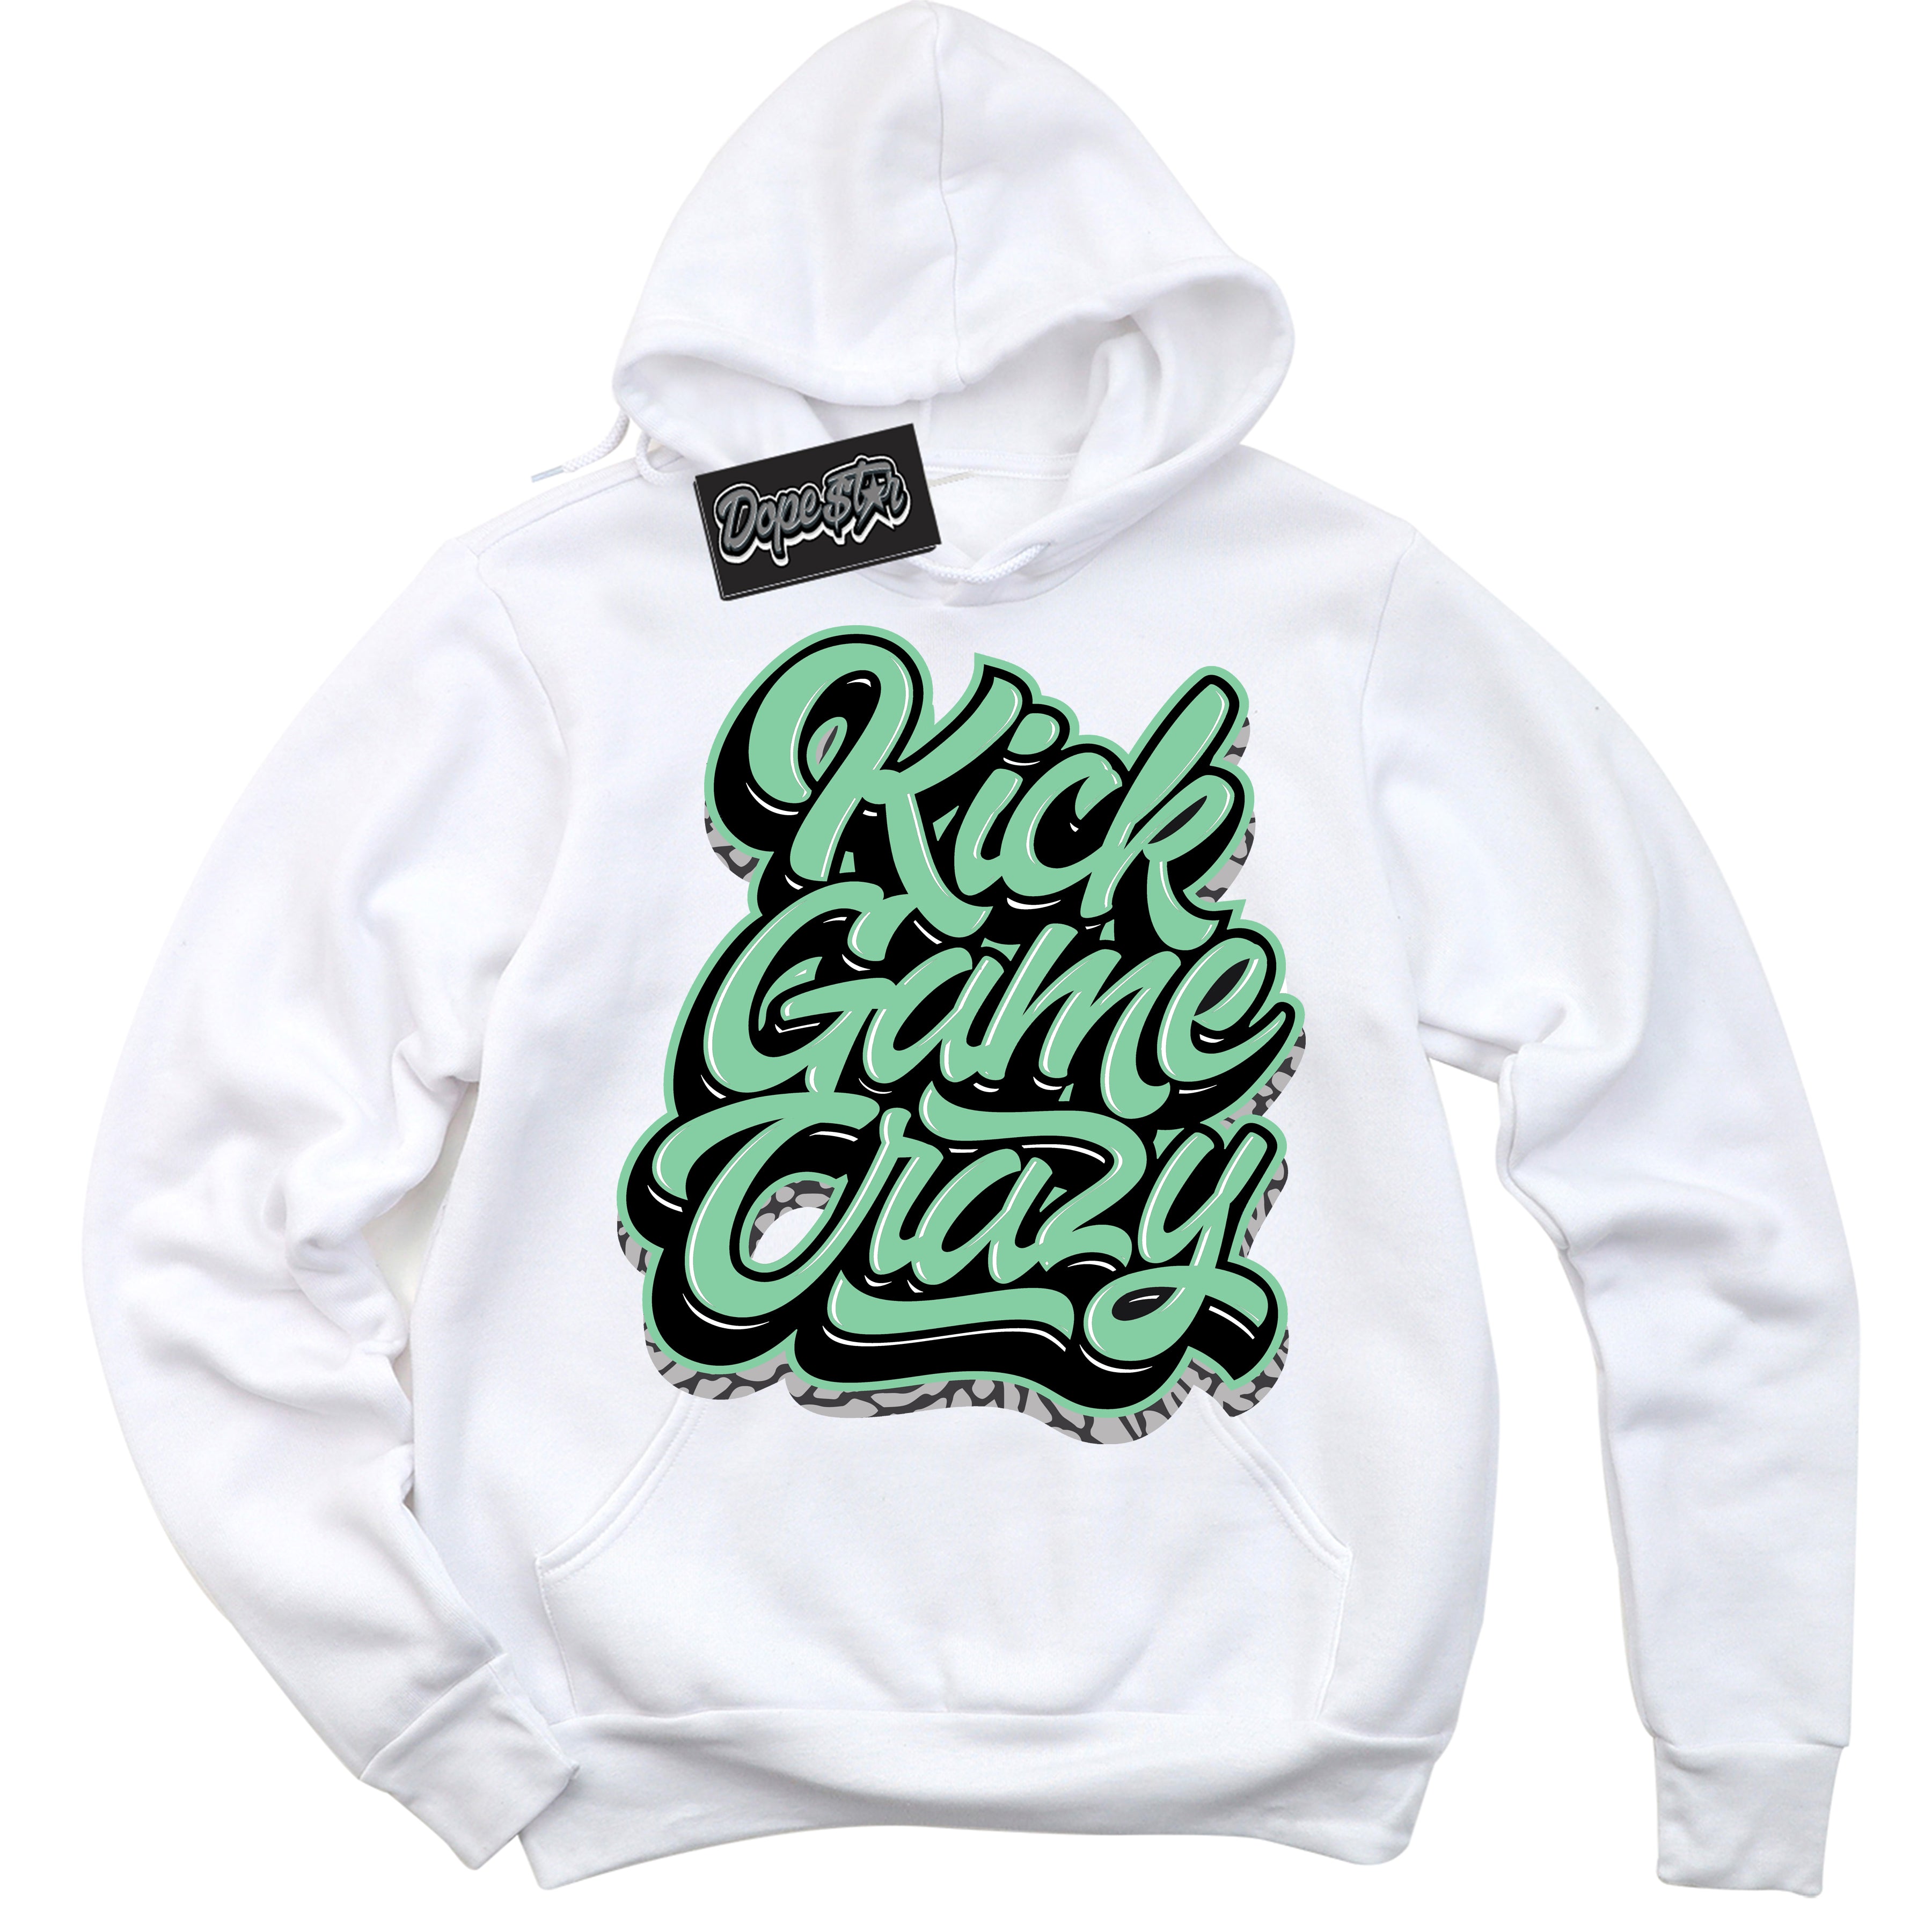 Cool White Graphic DopeStar Hoodie with “ Kick Game Crazy “ print, that perfectly matches Green Glow 3s sneakers